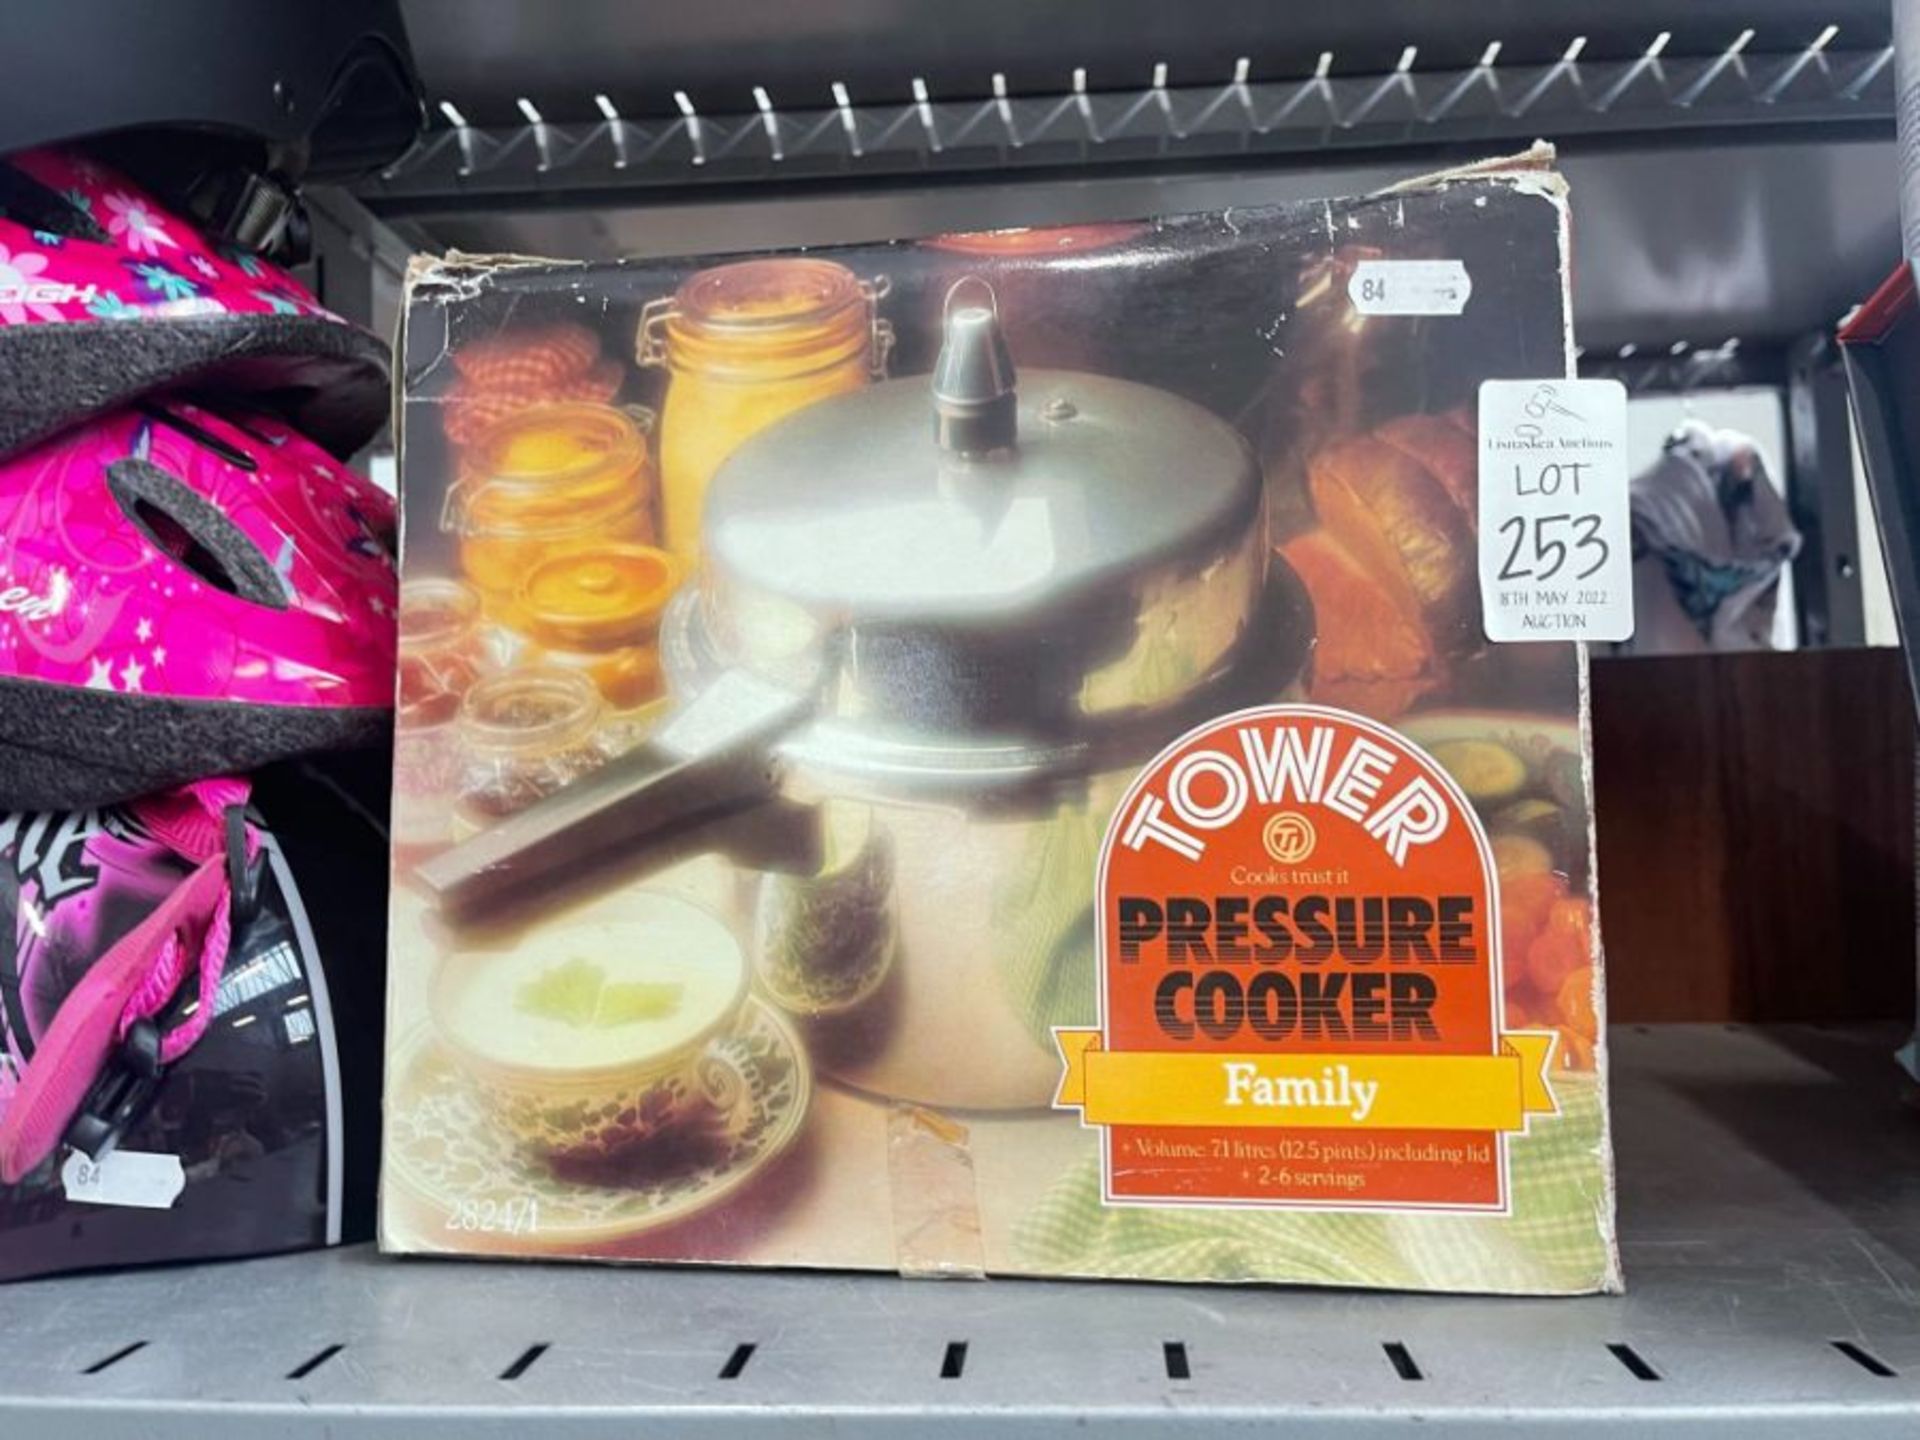 TOWER PRESSURE COOKER